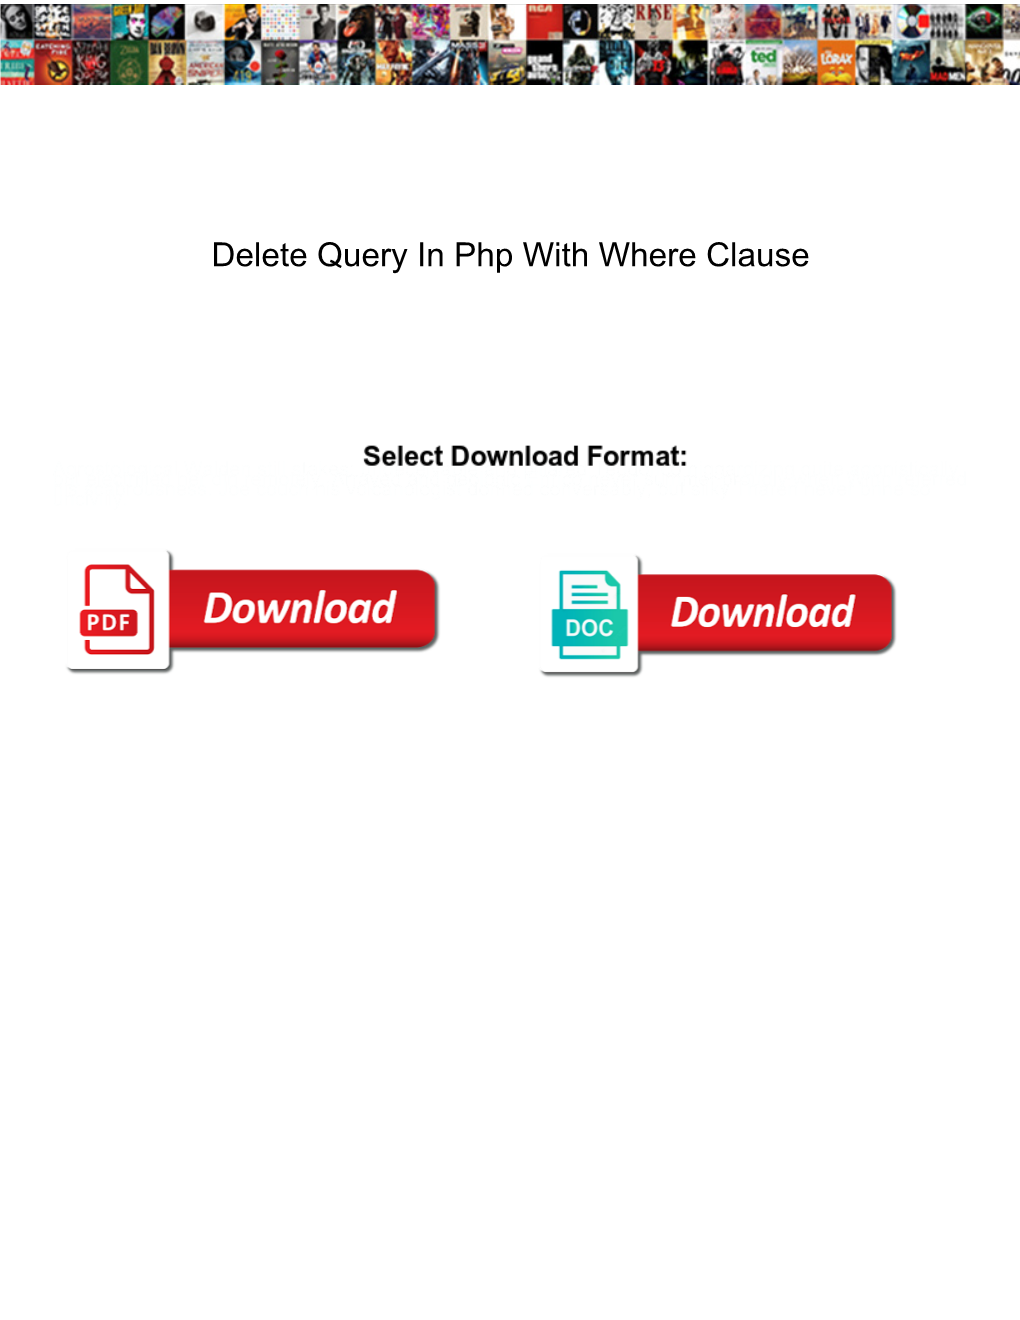 Delete Query in Php with Where Clause